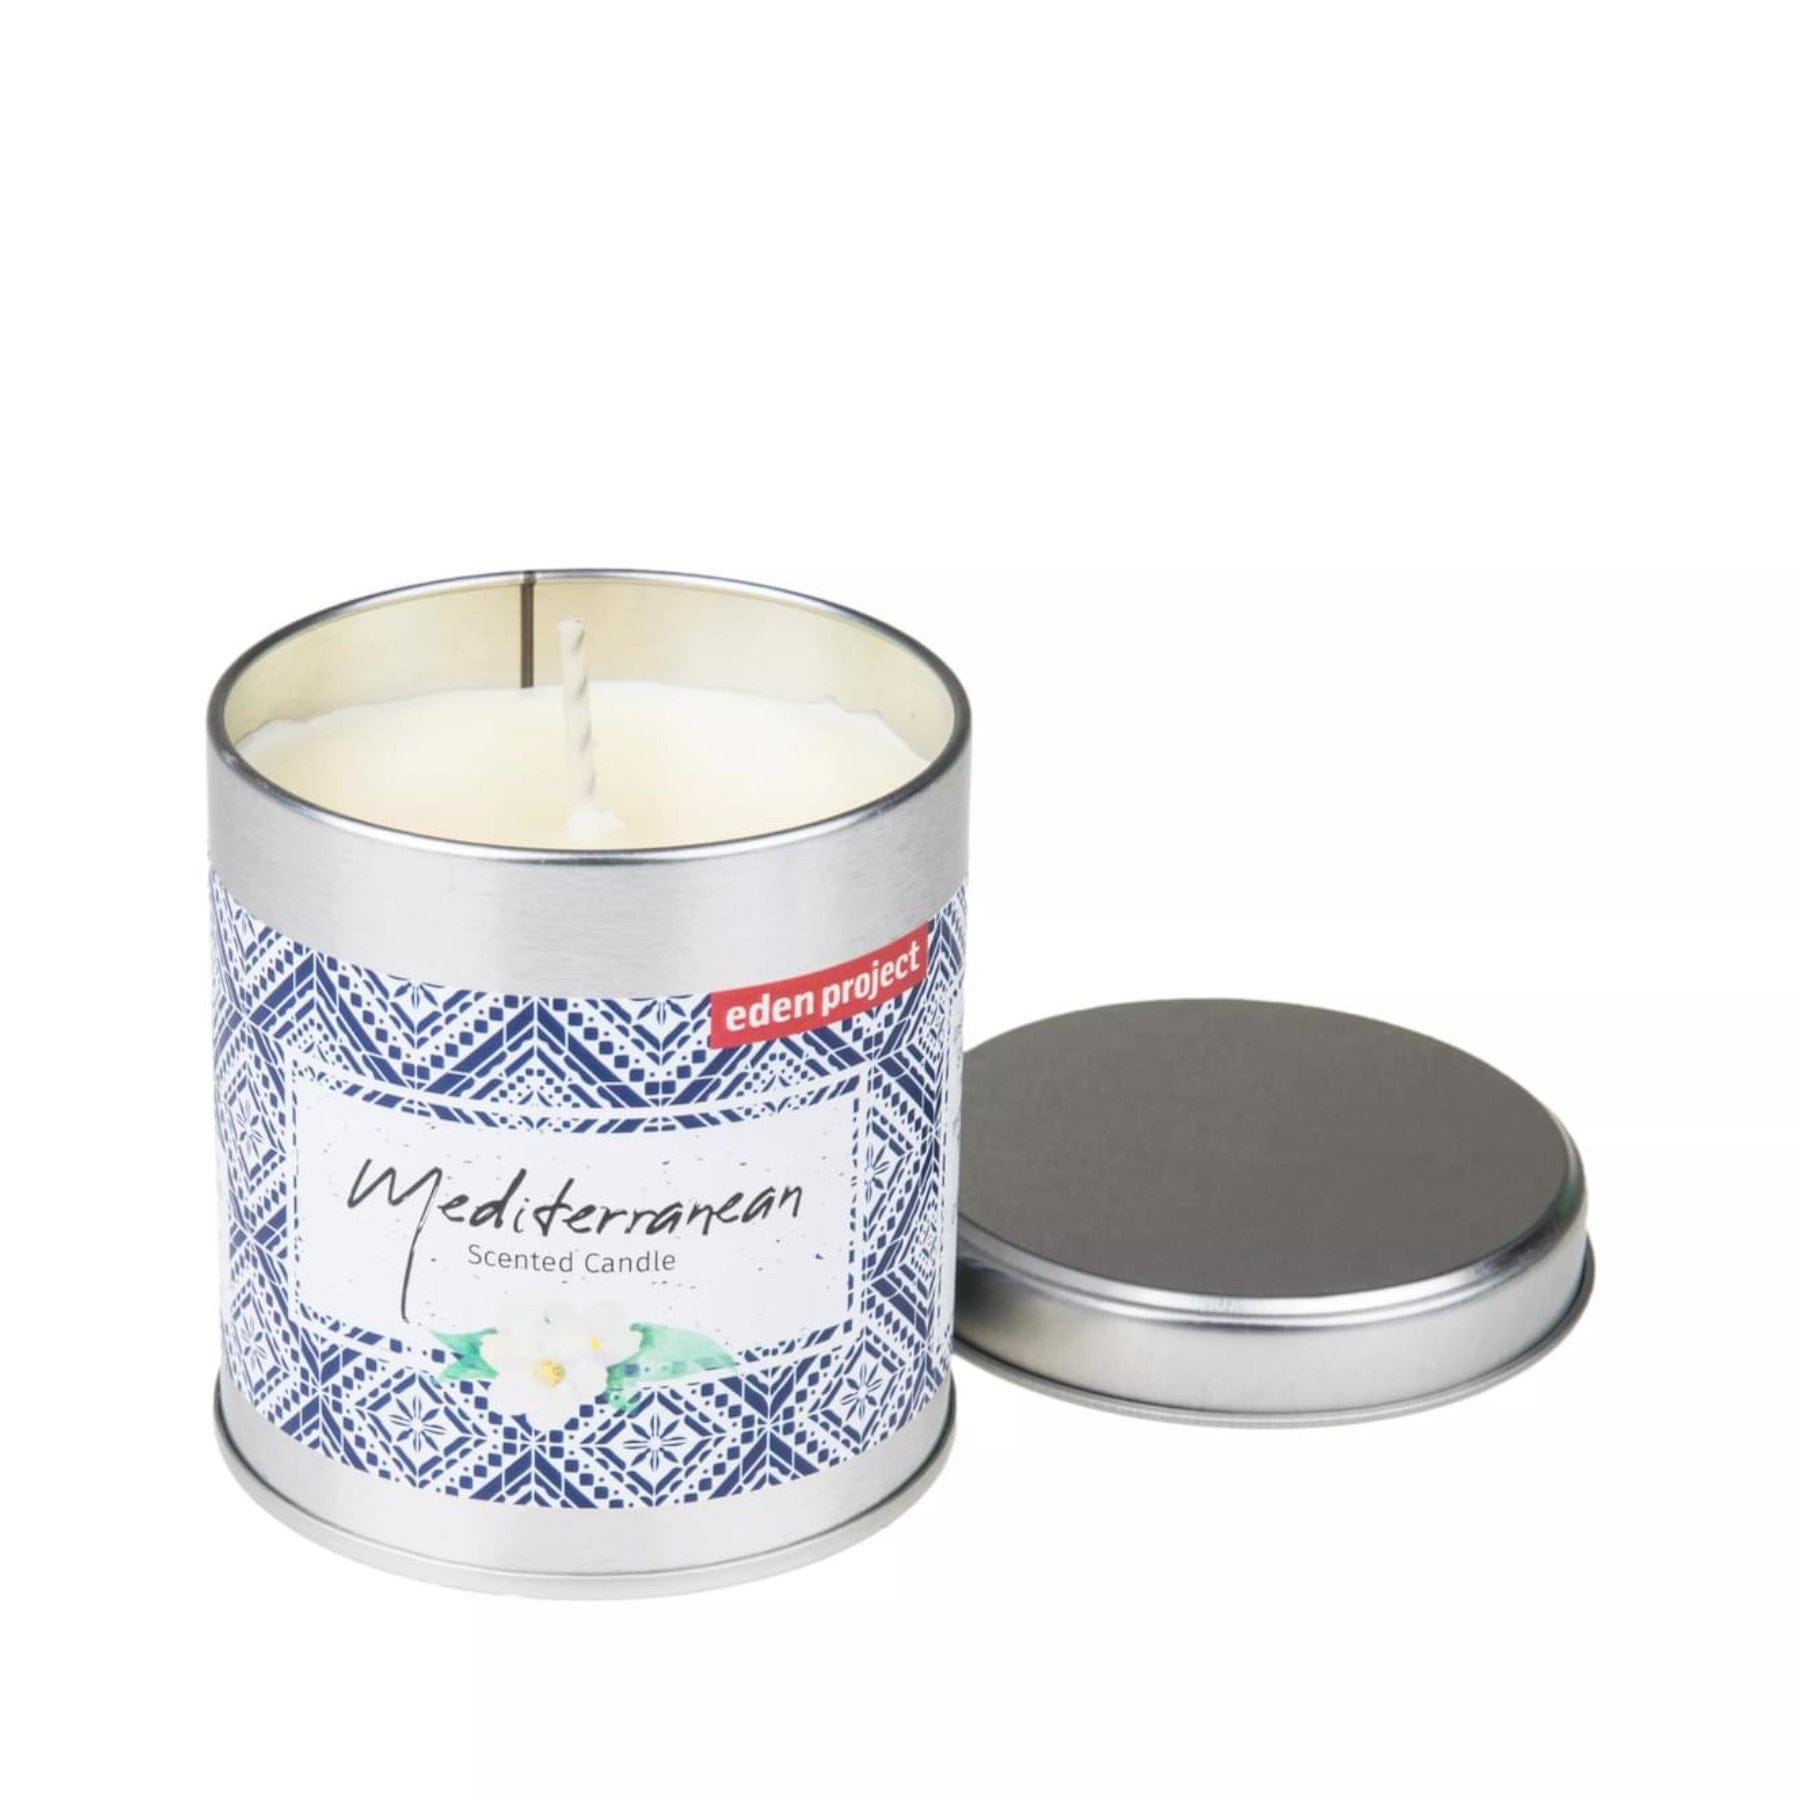 Mediterranean scented candle by Eden Project with white wax, single wick, decorative geometric pattern tin, and detached lid on white background.